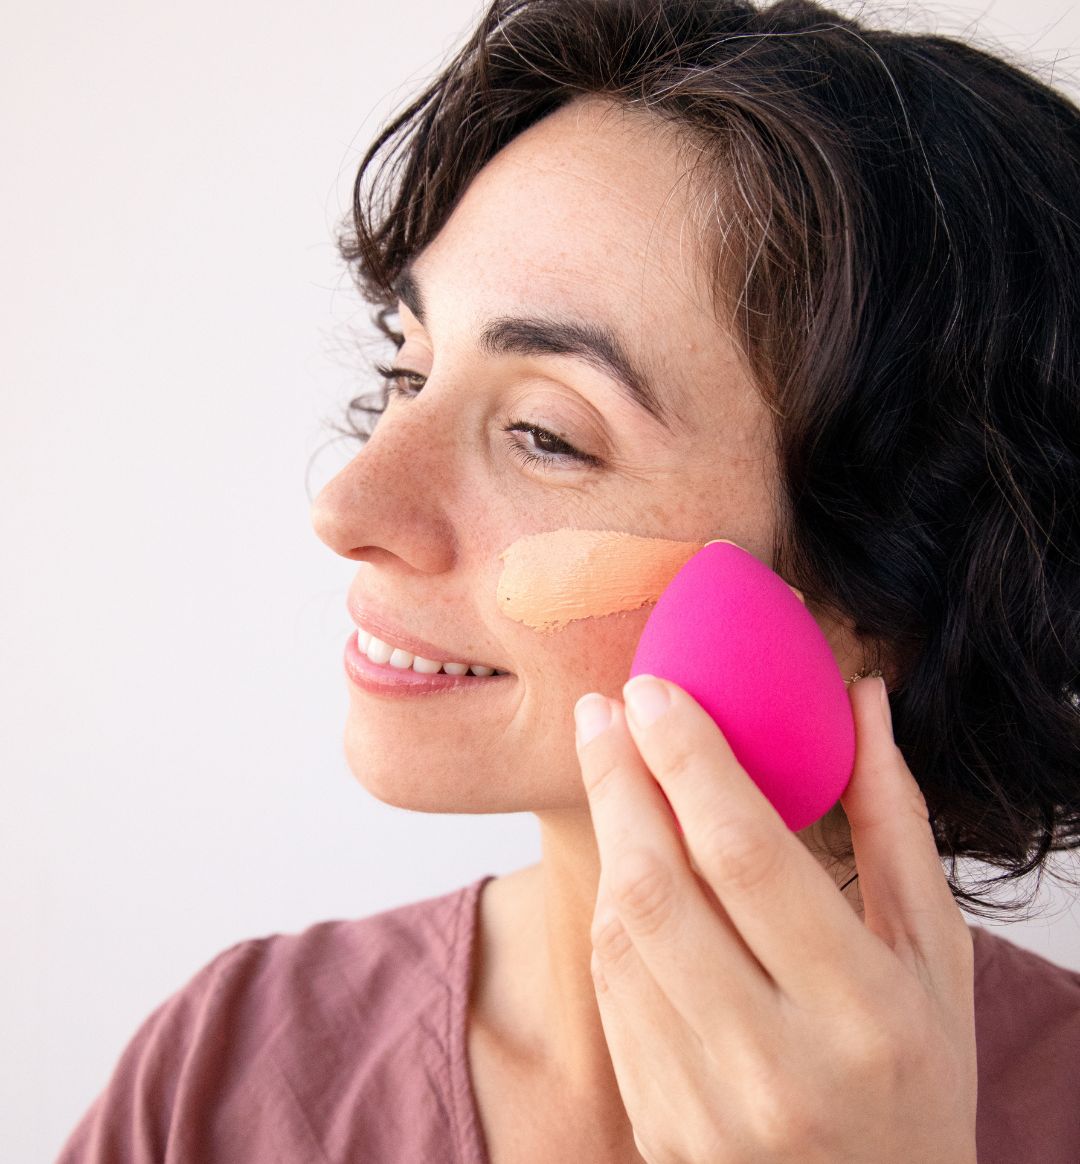 How To Clean Makeup Sponges Properly – 100% PURE